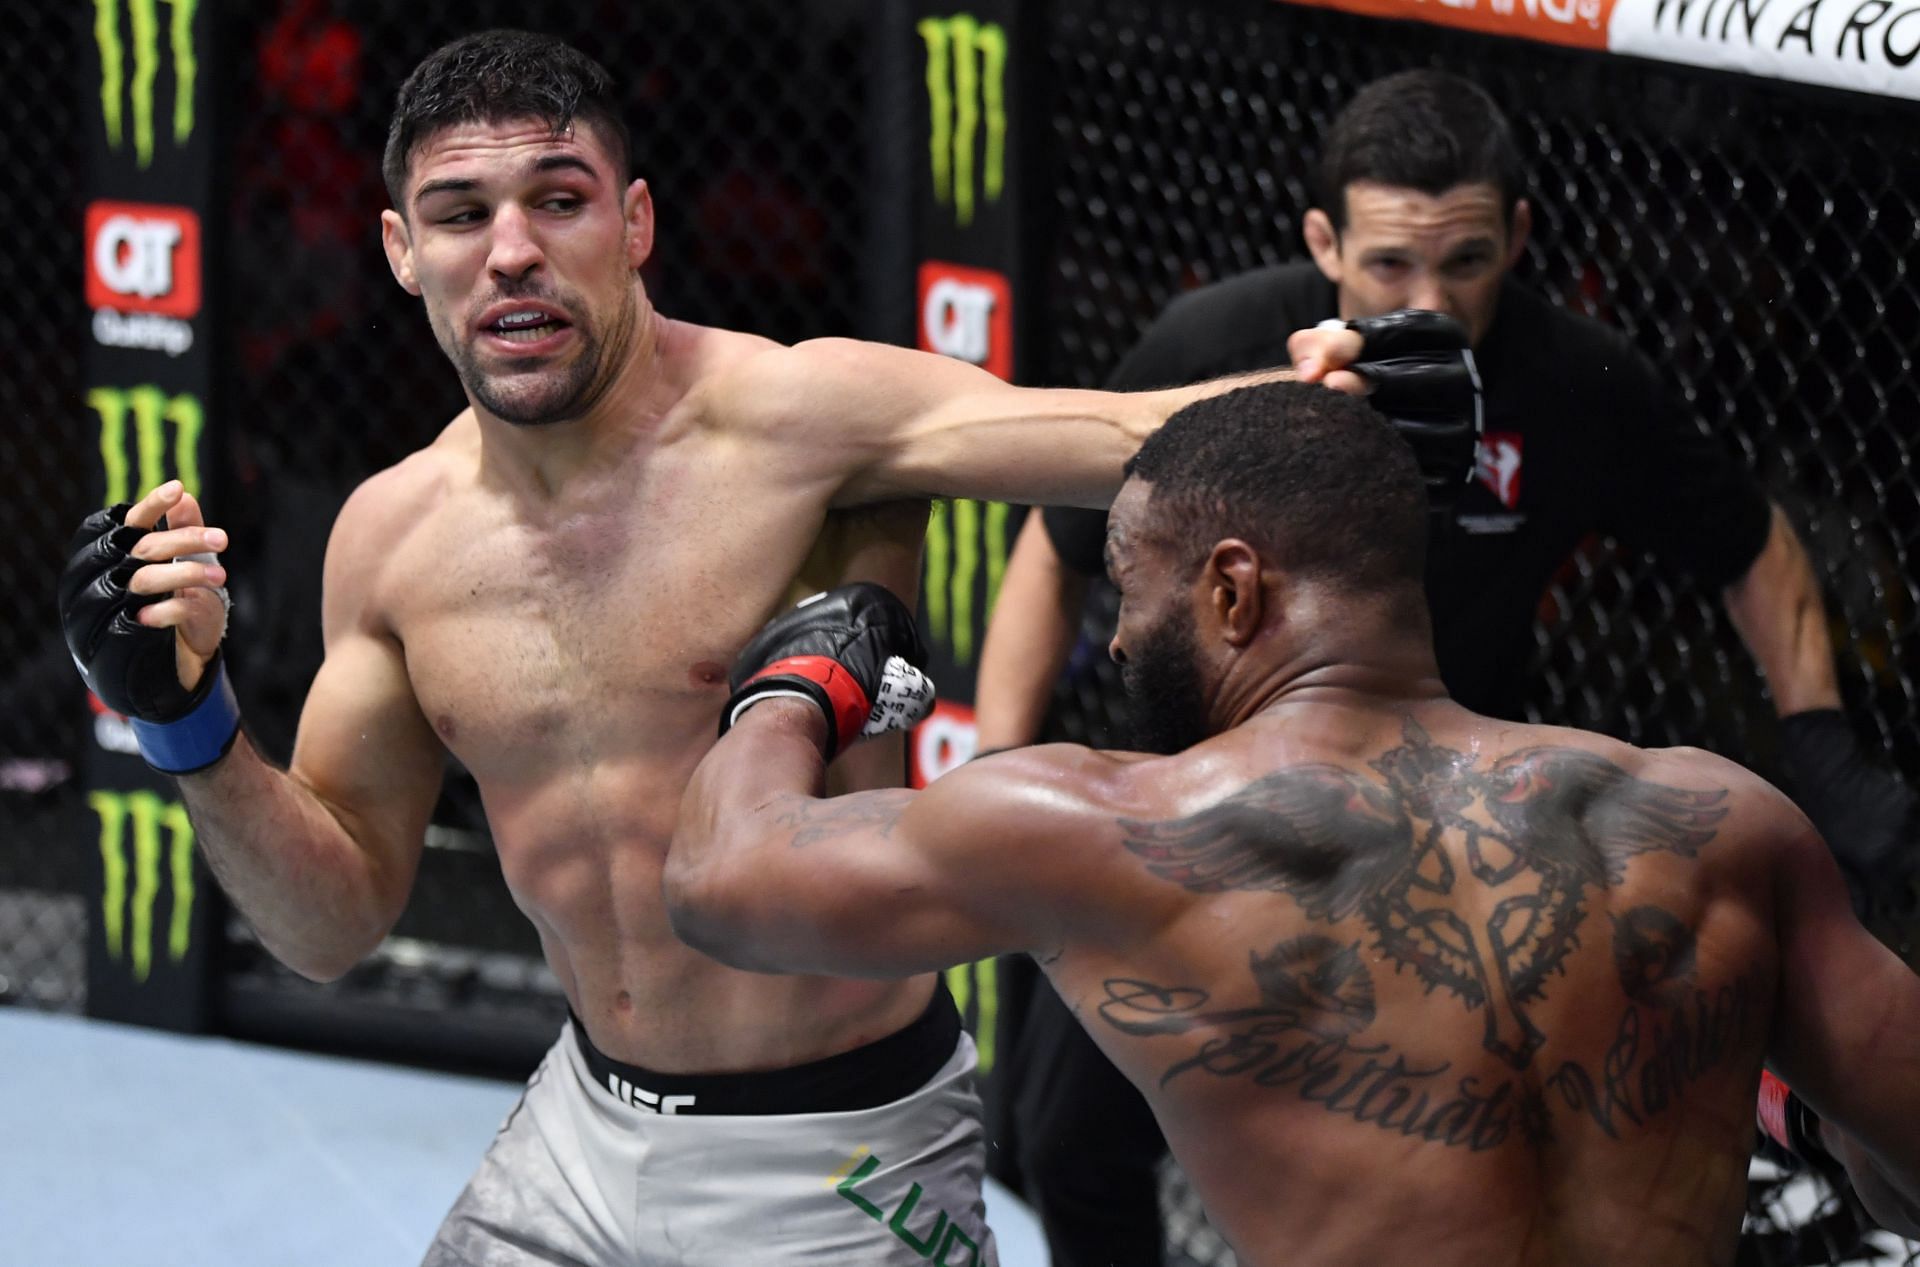 After 17 UFC fights, Vicente Luque will compete in the main event for the first time in 2022